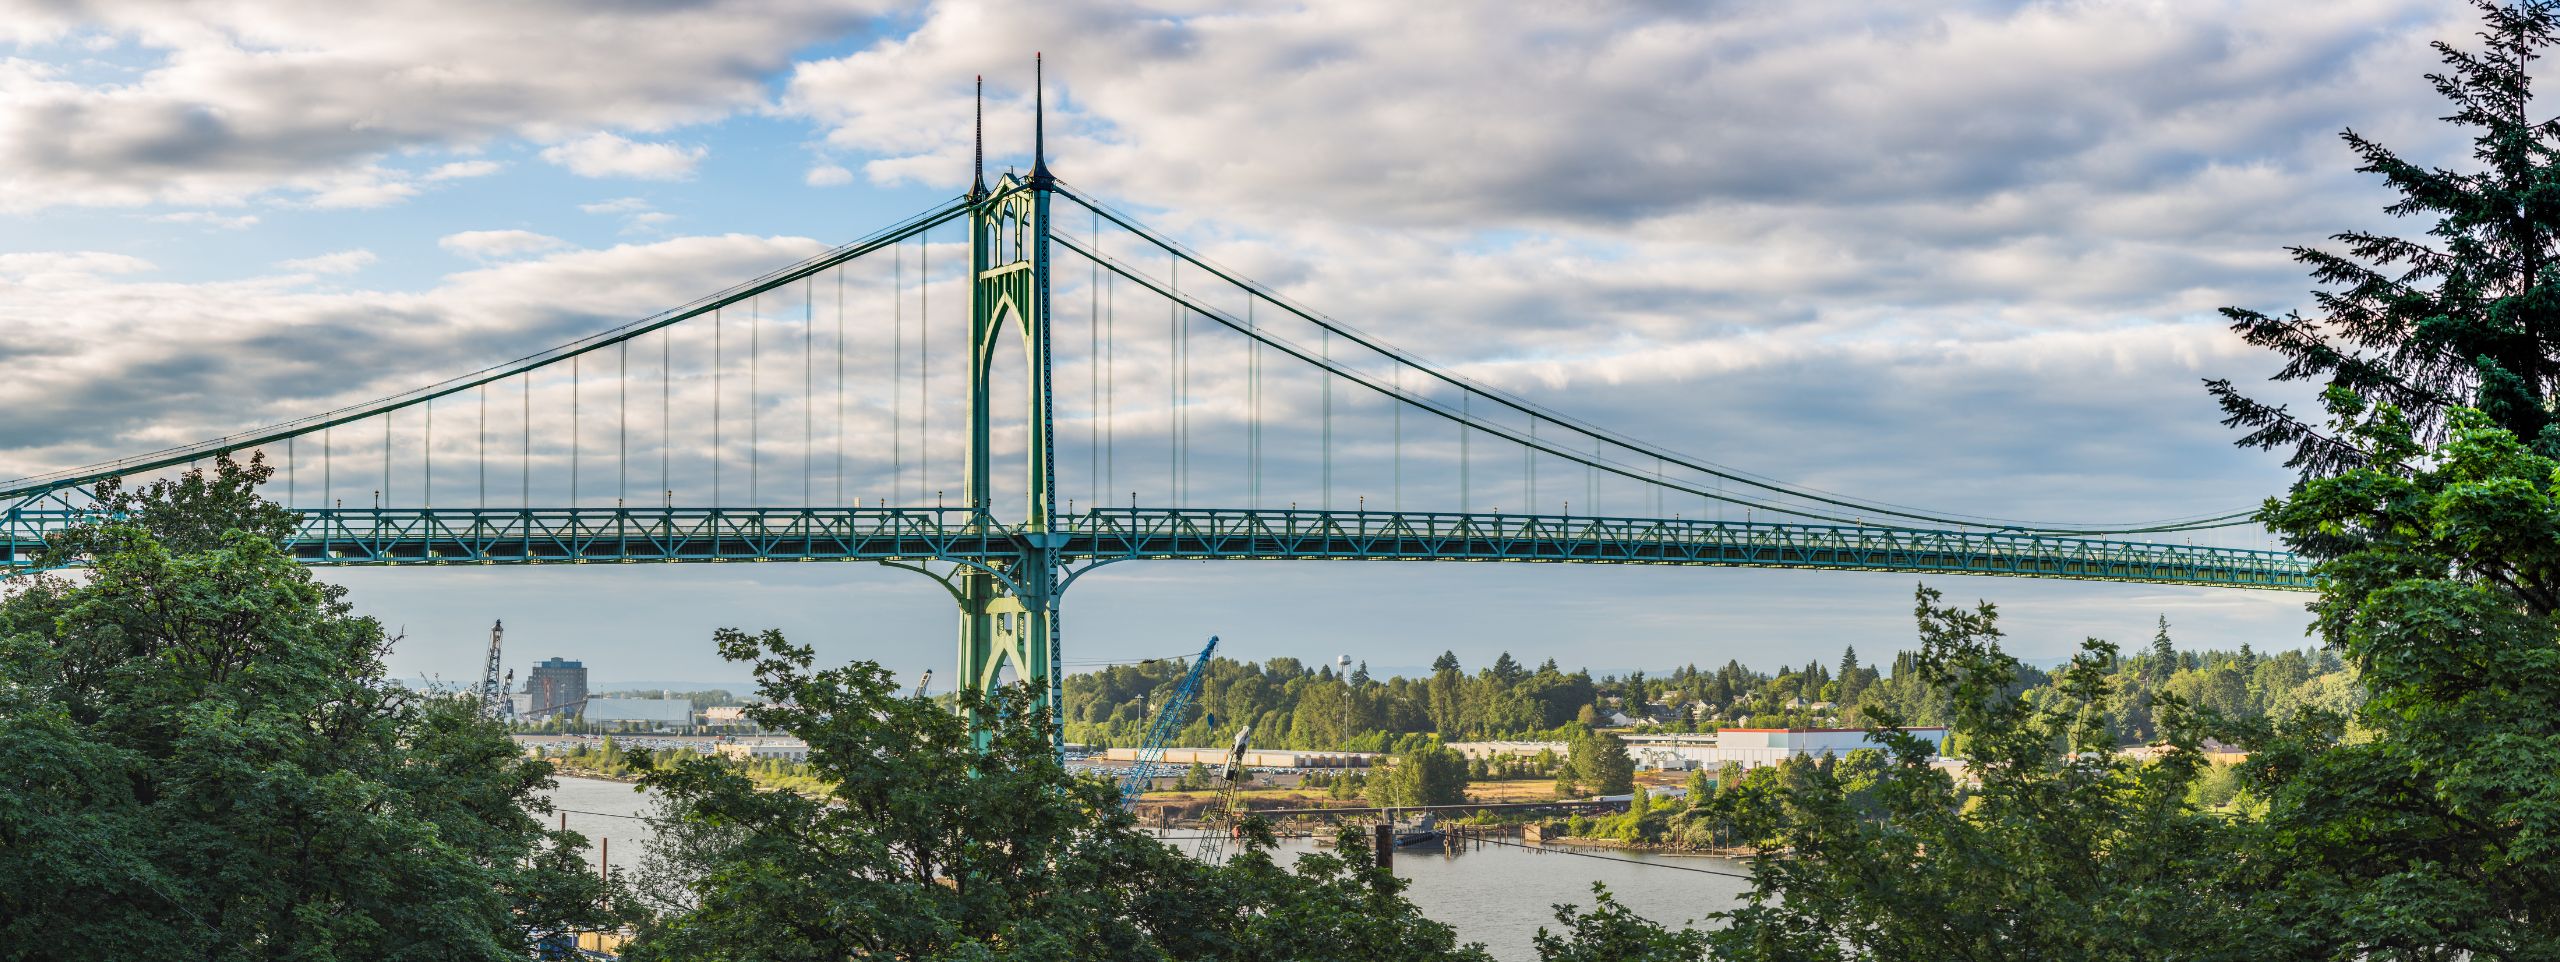 The St Johns Bridge in North Portland with a lovely cloudy background